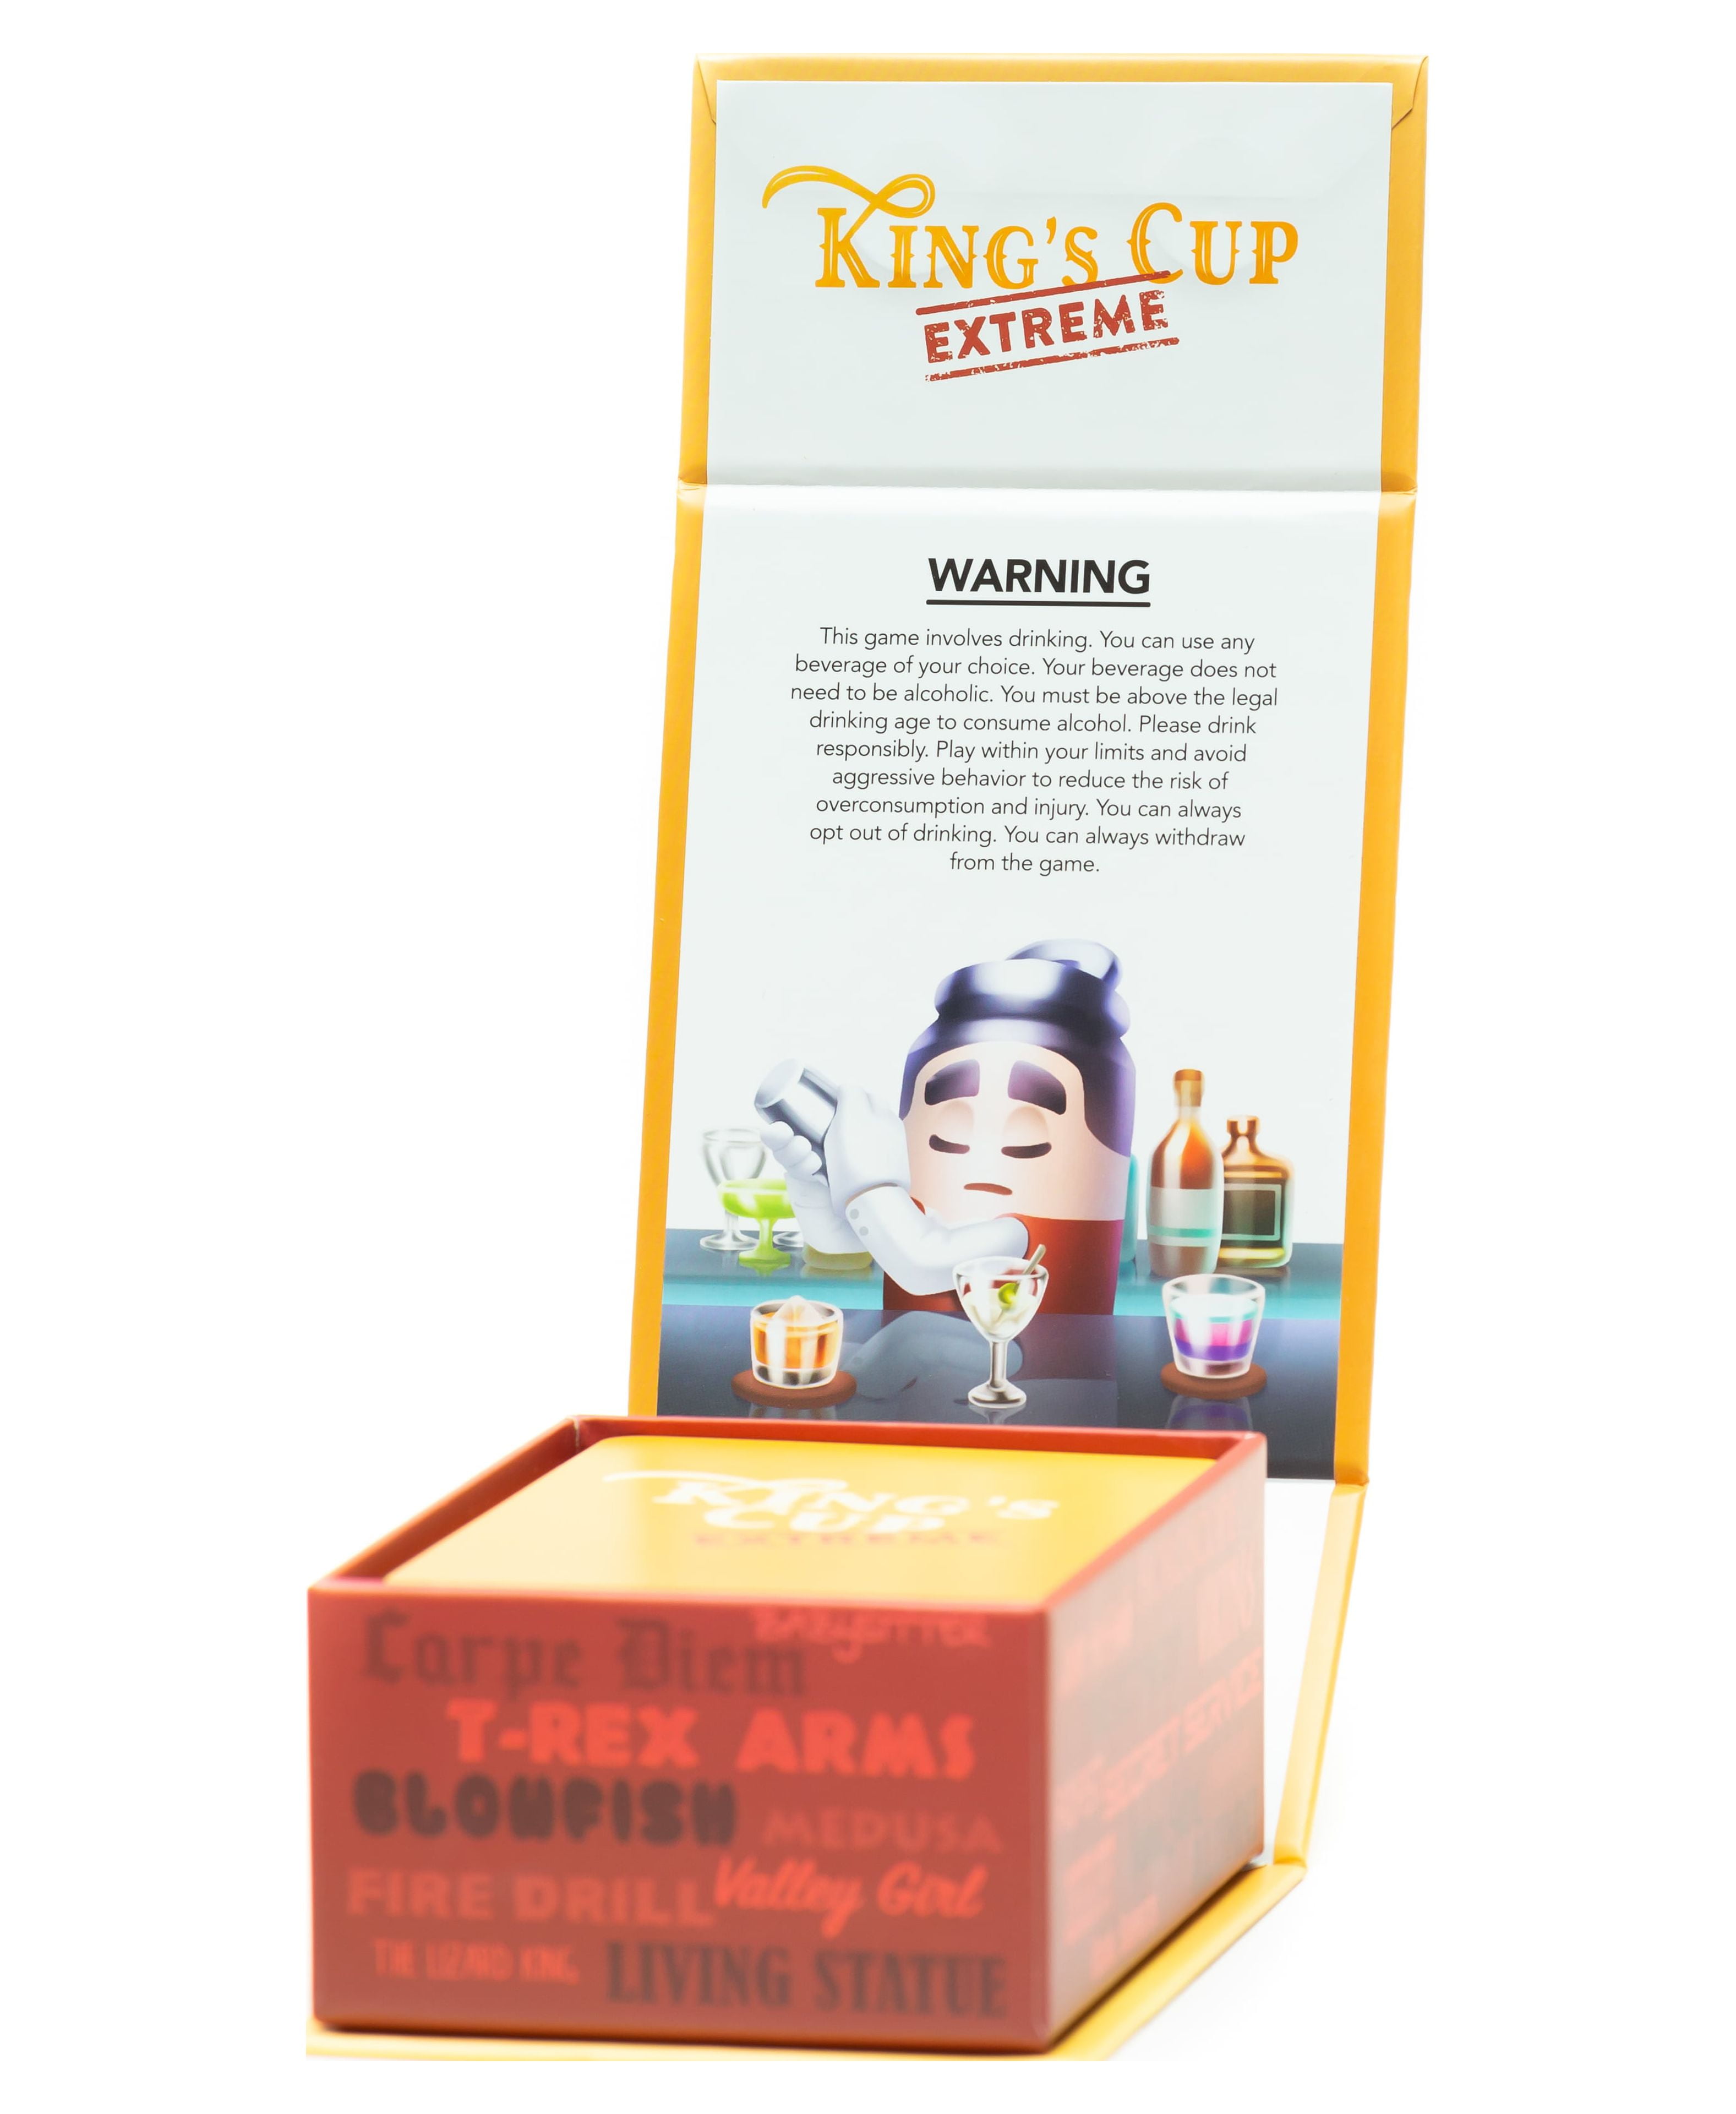 Kings Cup Card Game Drinking Game Gift Drinking Poster by shirtzz123